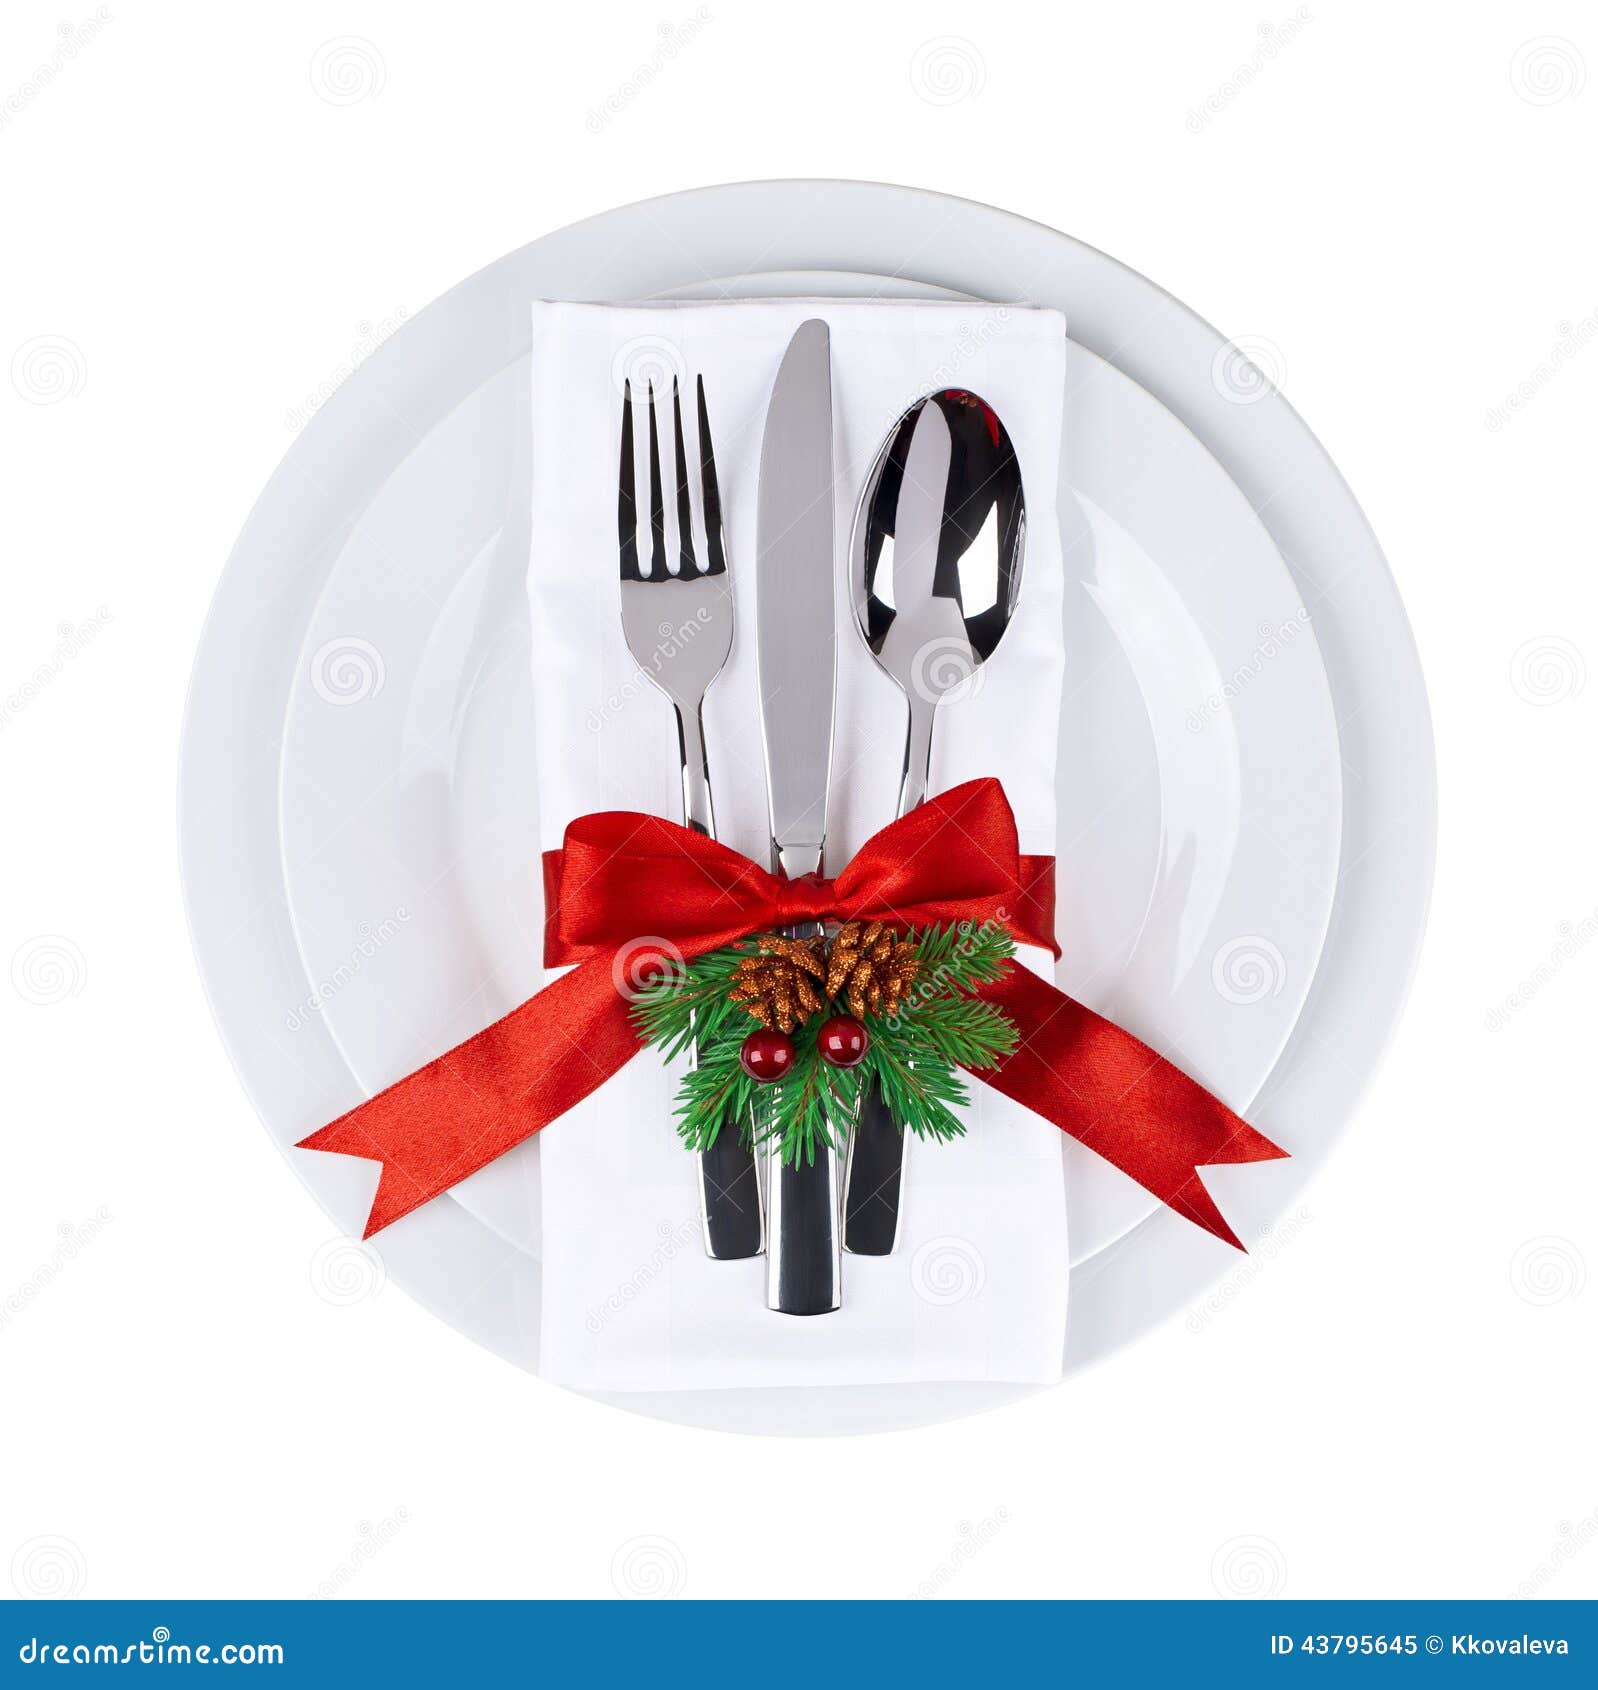 Christmas Plate And Silverware Isolated On White 